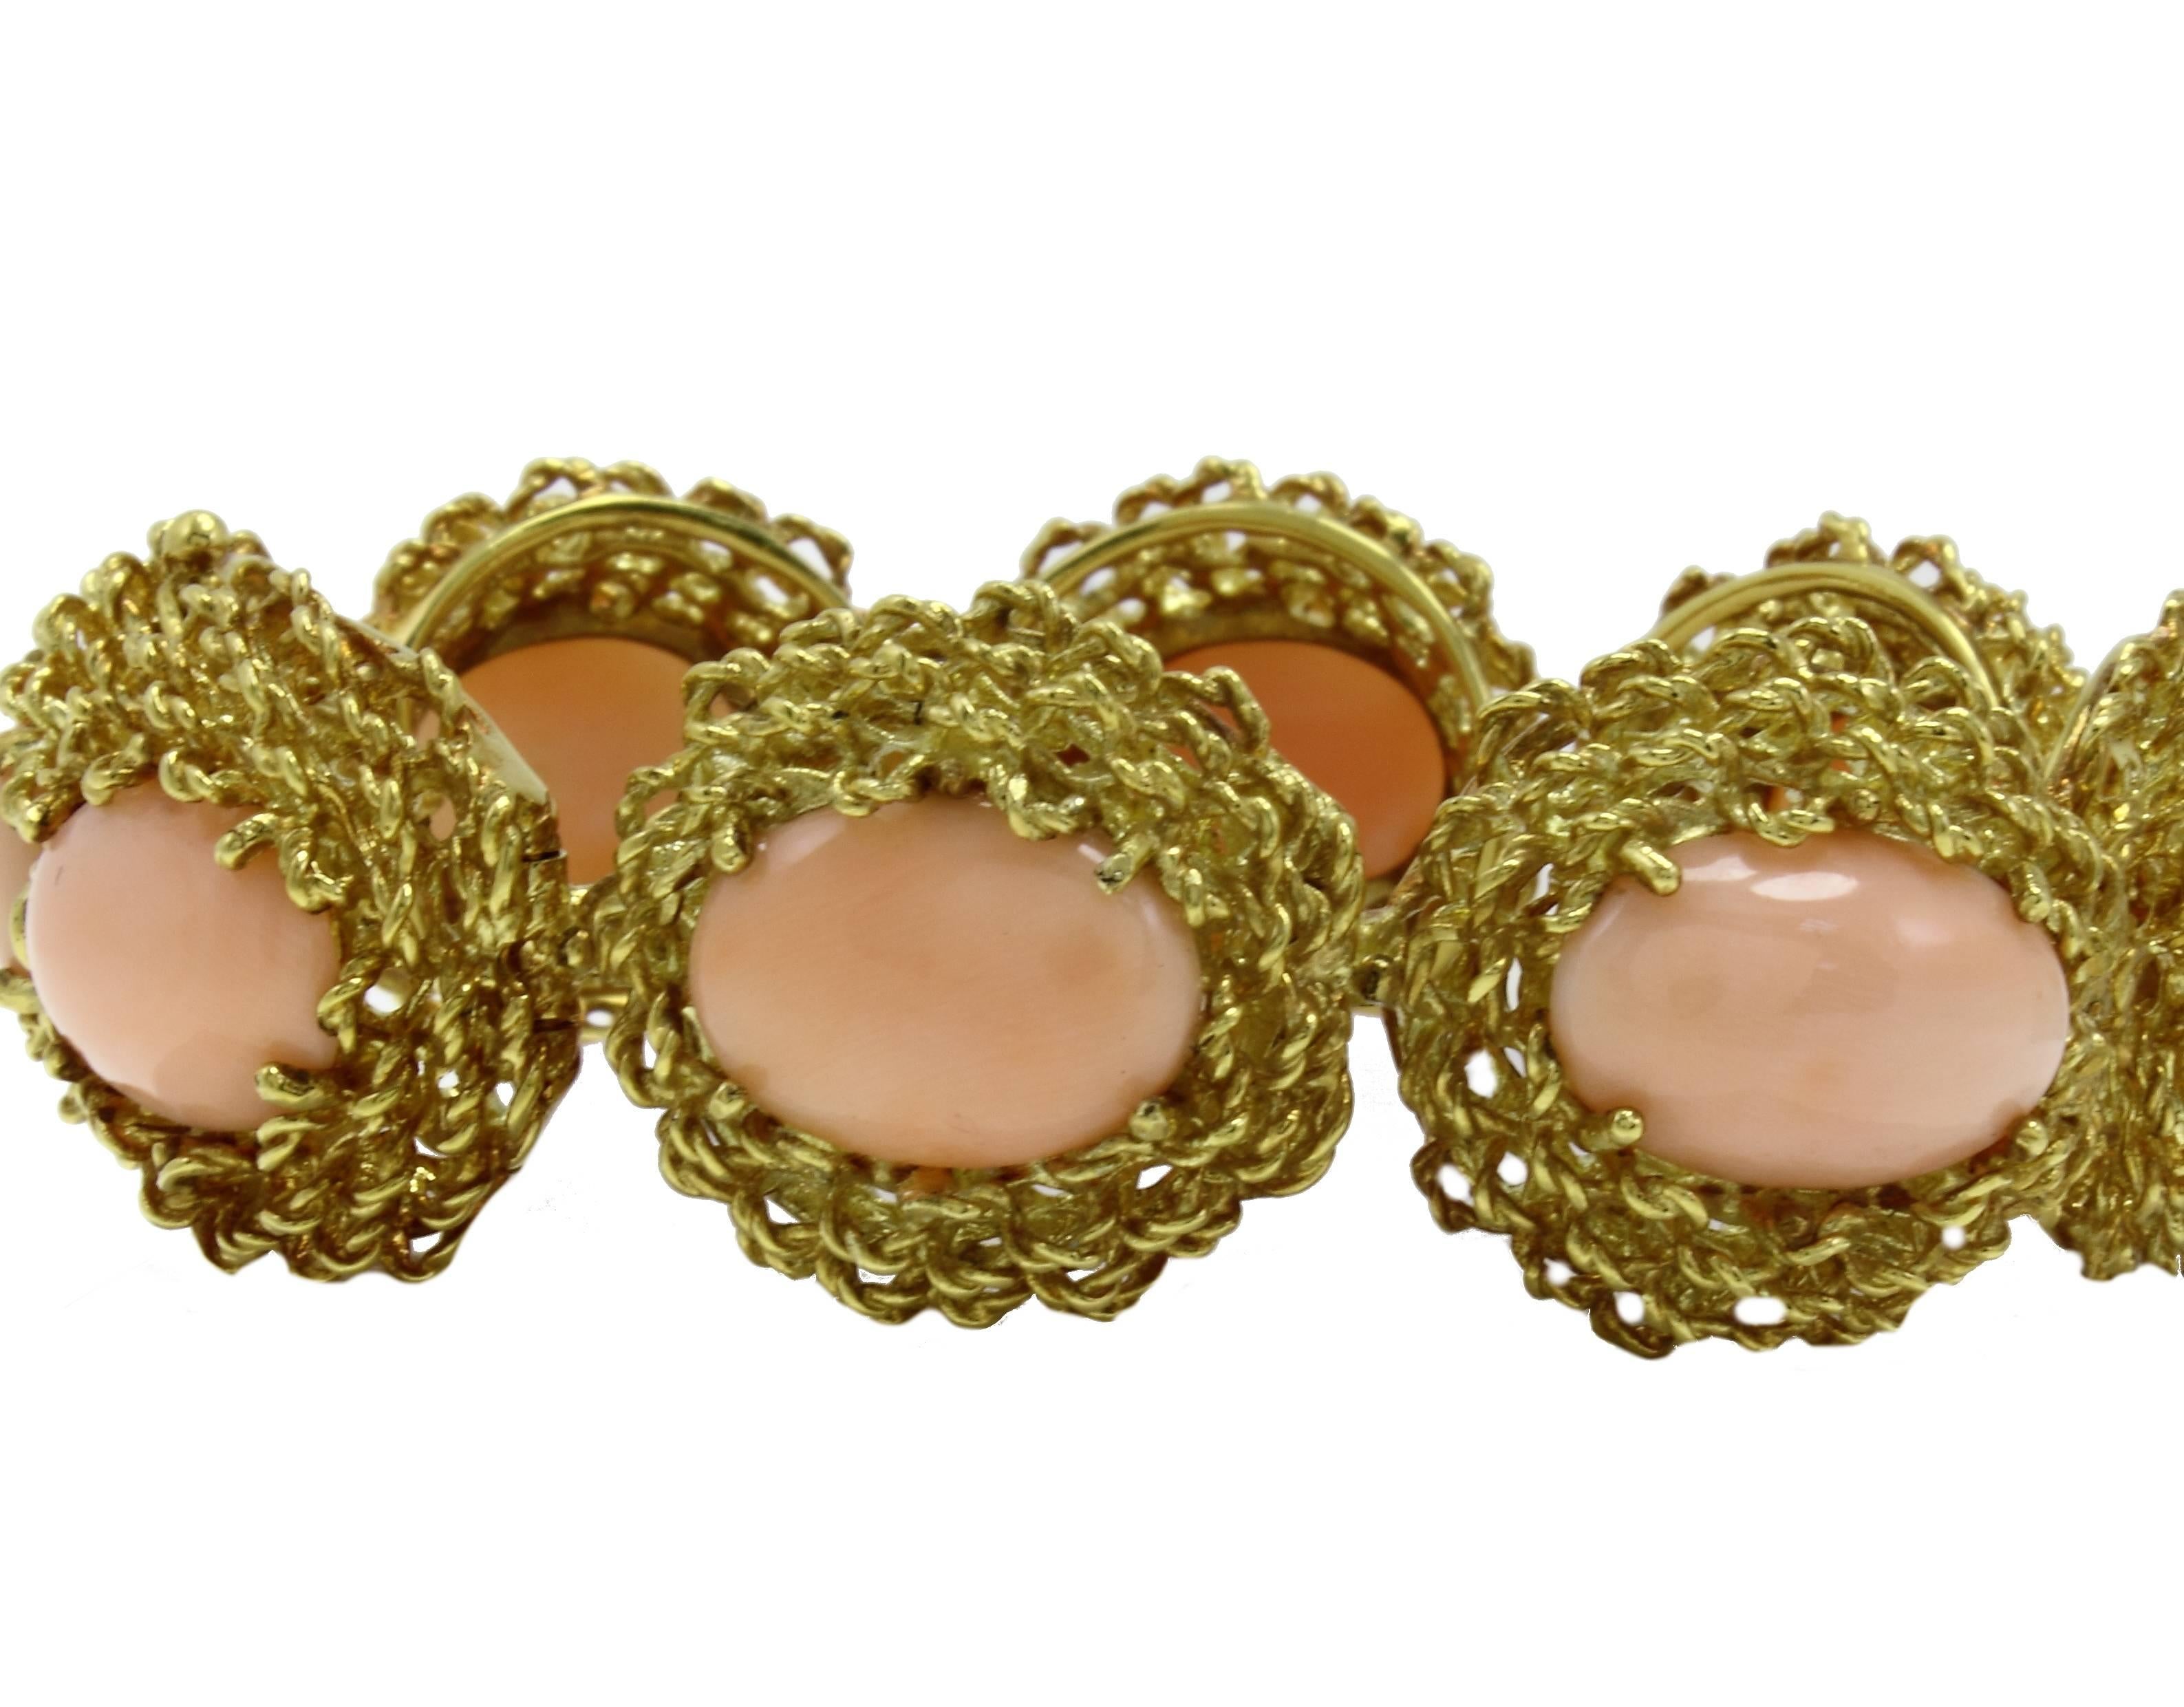 Pink coral clumper bracelet in 18kt yellow gold (60.90gr)

coral 9.60gr
tot weight 70.3 gr
r.f.  gfefu,aa